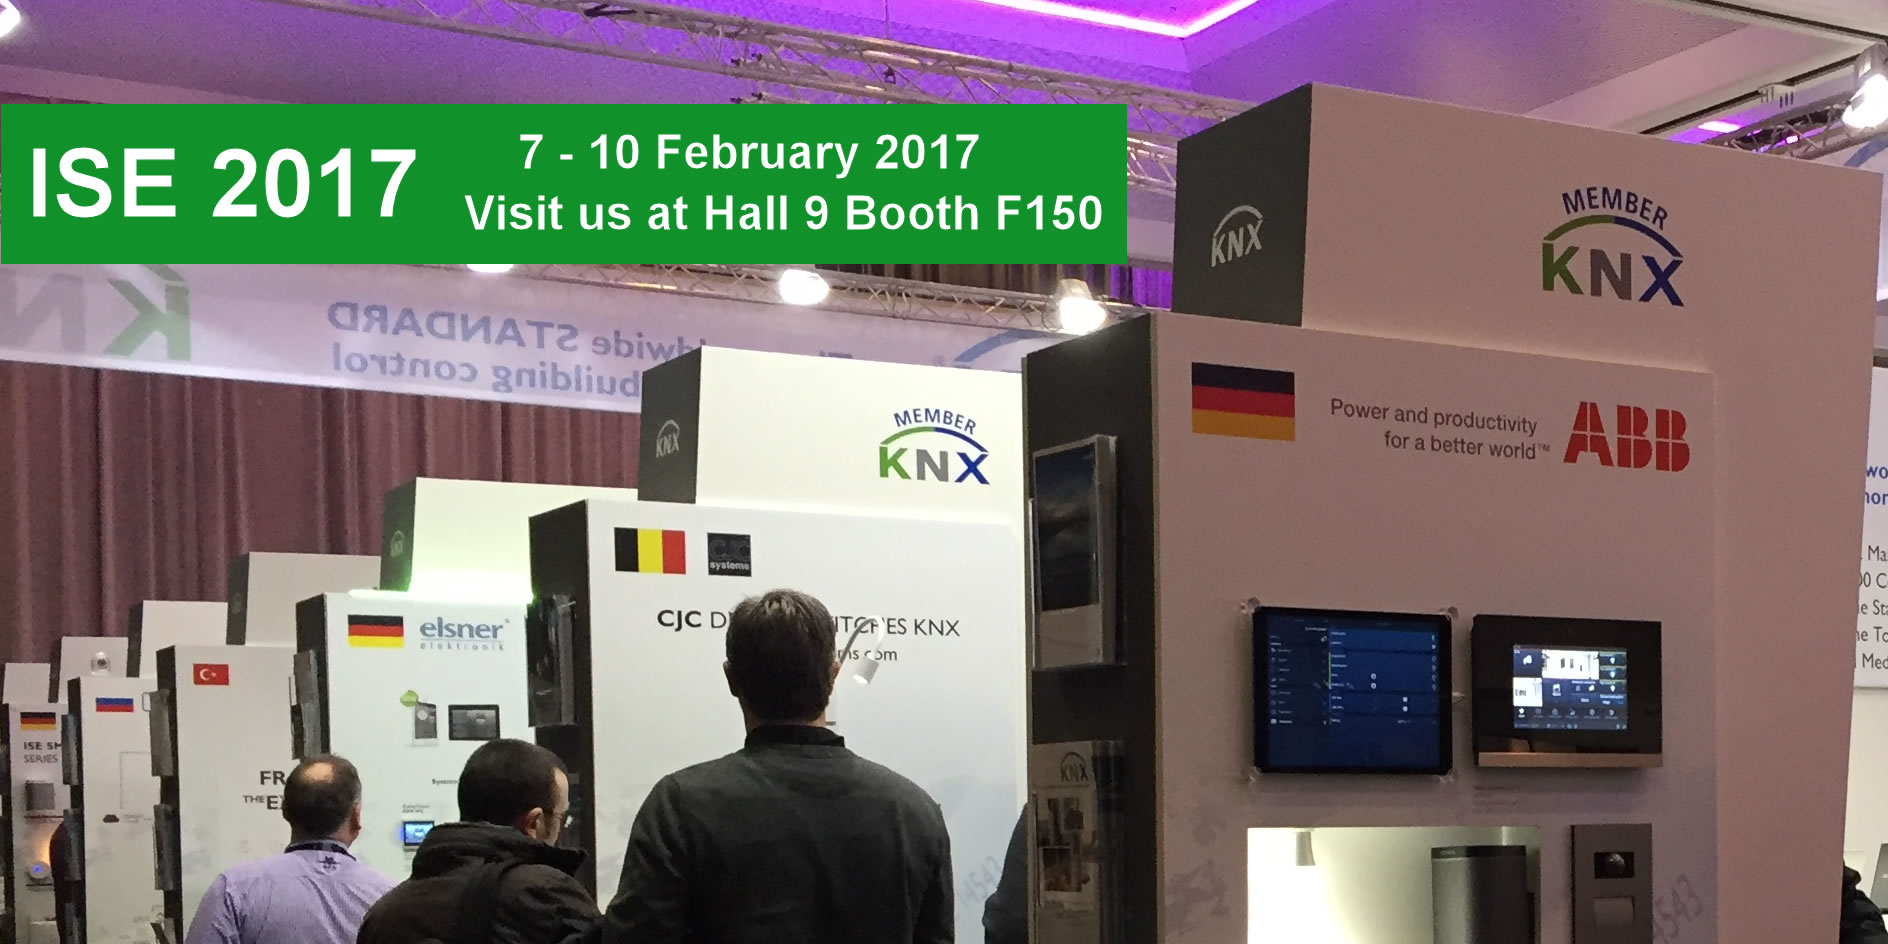 knx-association-members-at-ise-2017